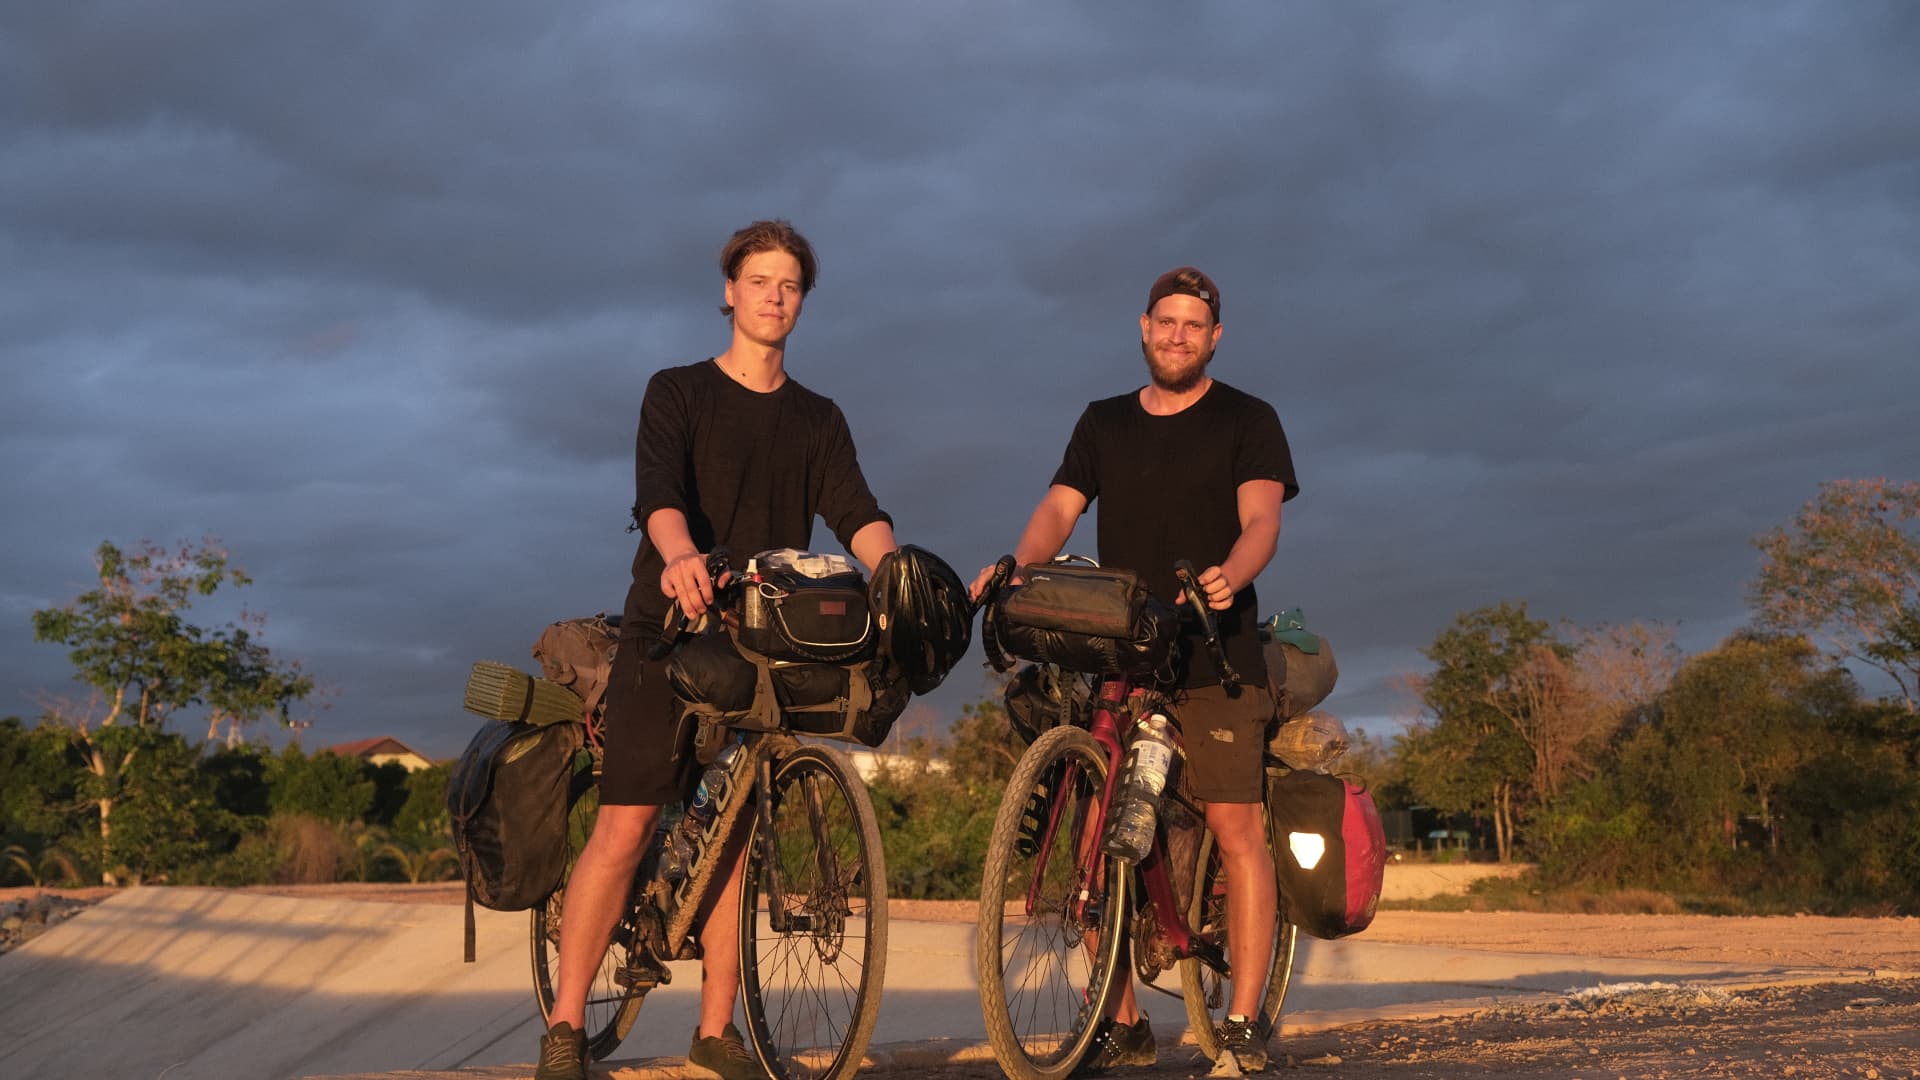 To flee the rat bustle, this pair cycled 15,000 km along the route from Finland to Singapore